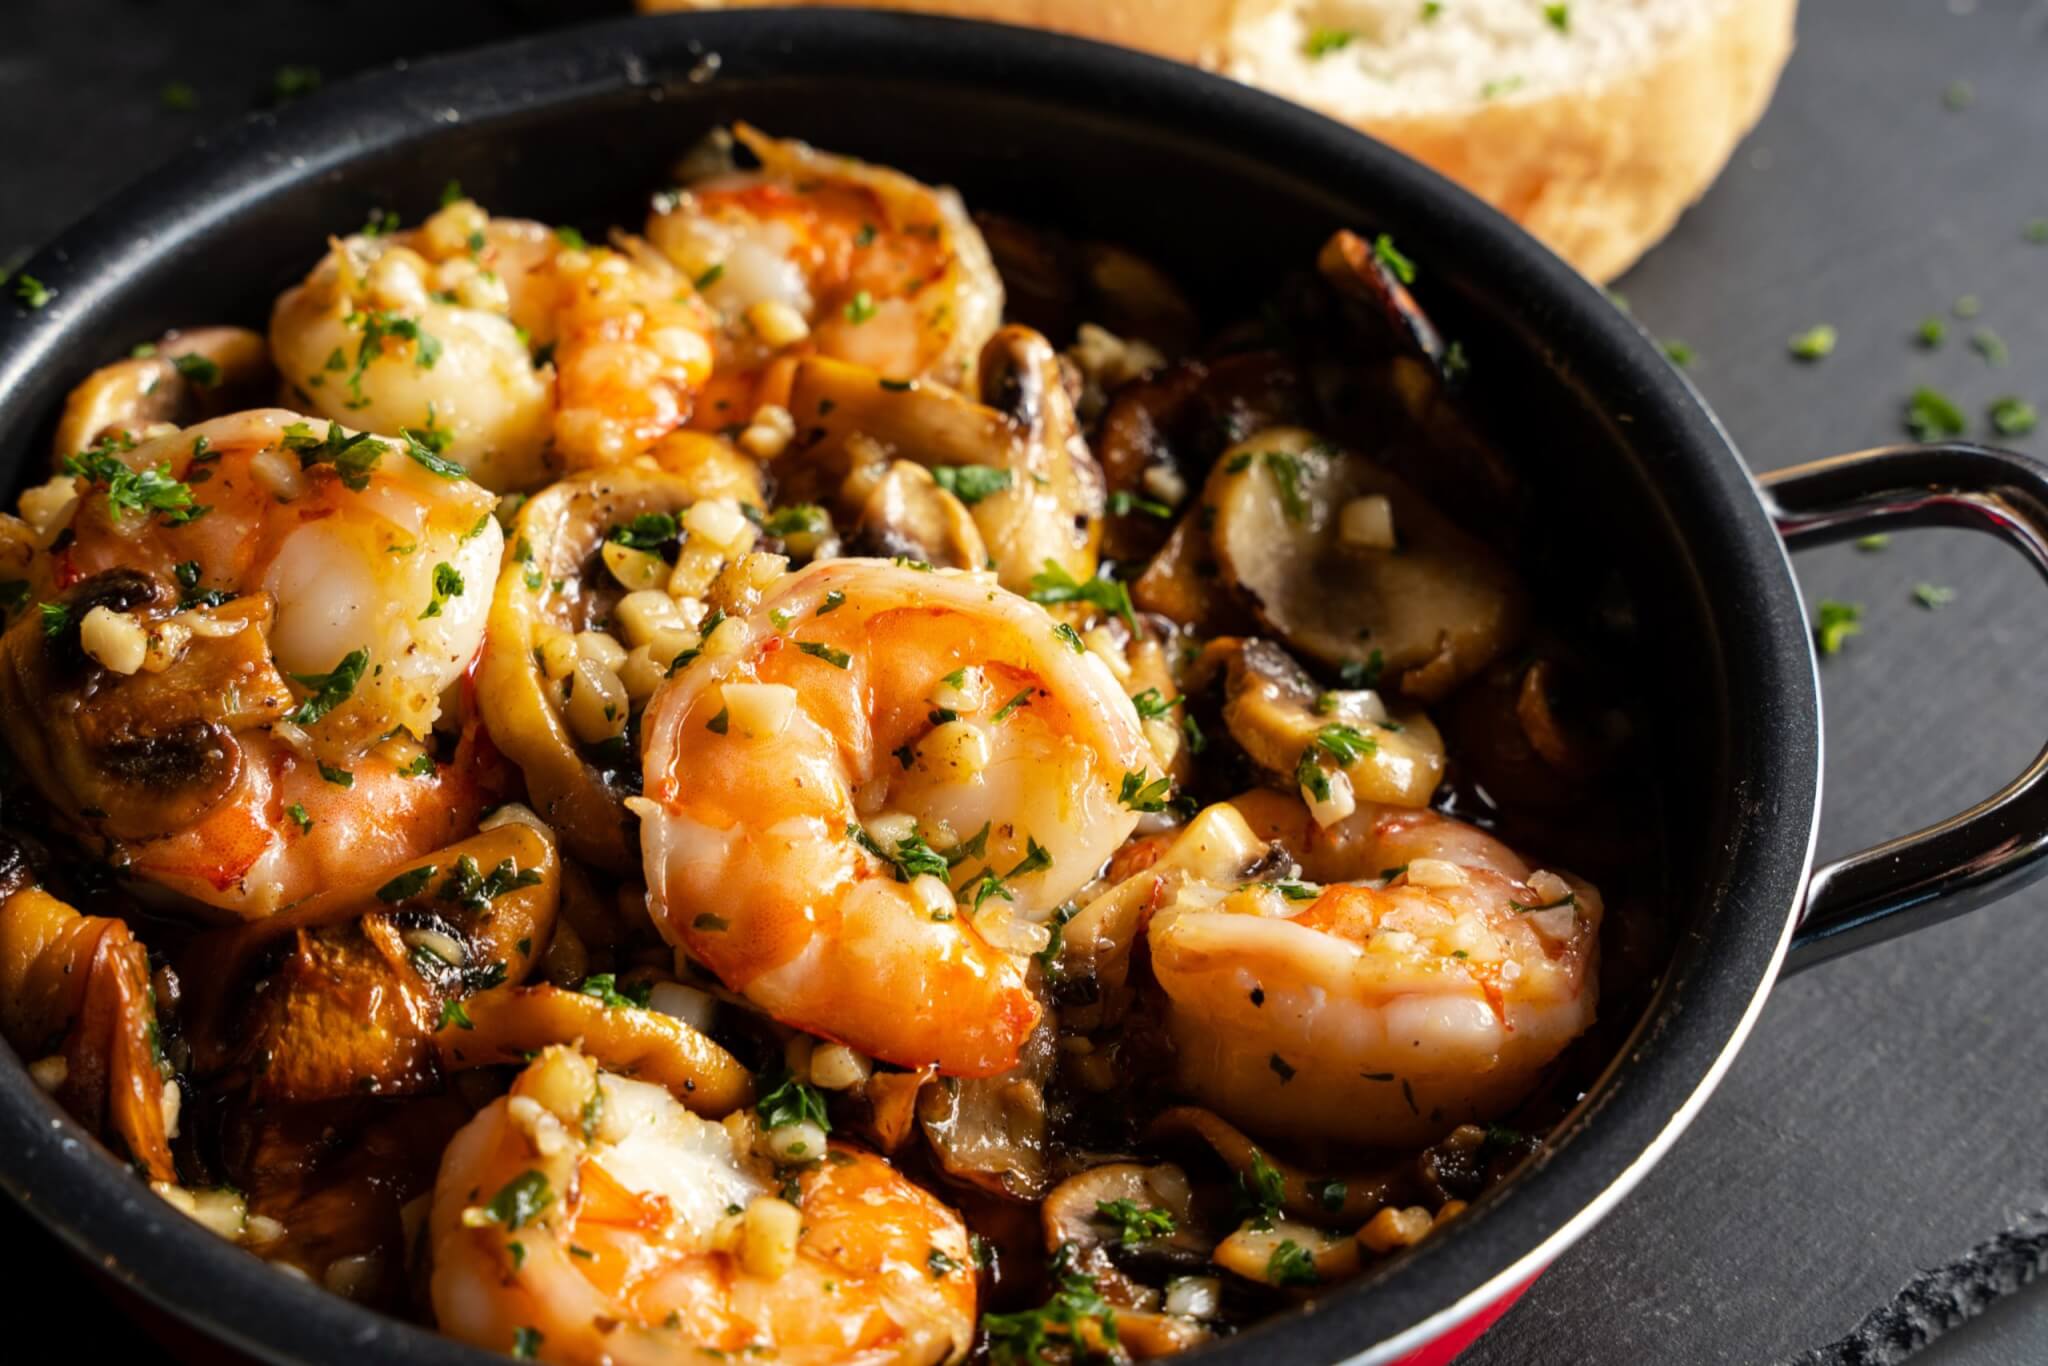 Shrimp scampi is one of the five best easy dinner ideas, according to experts.